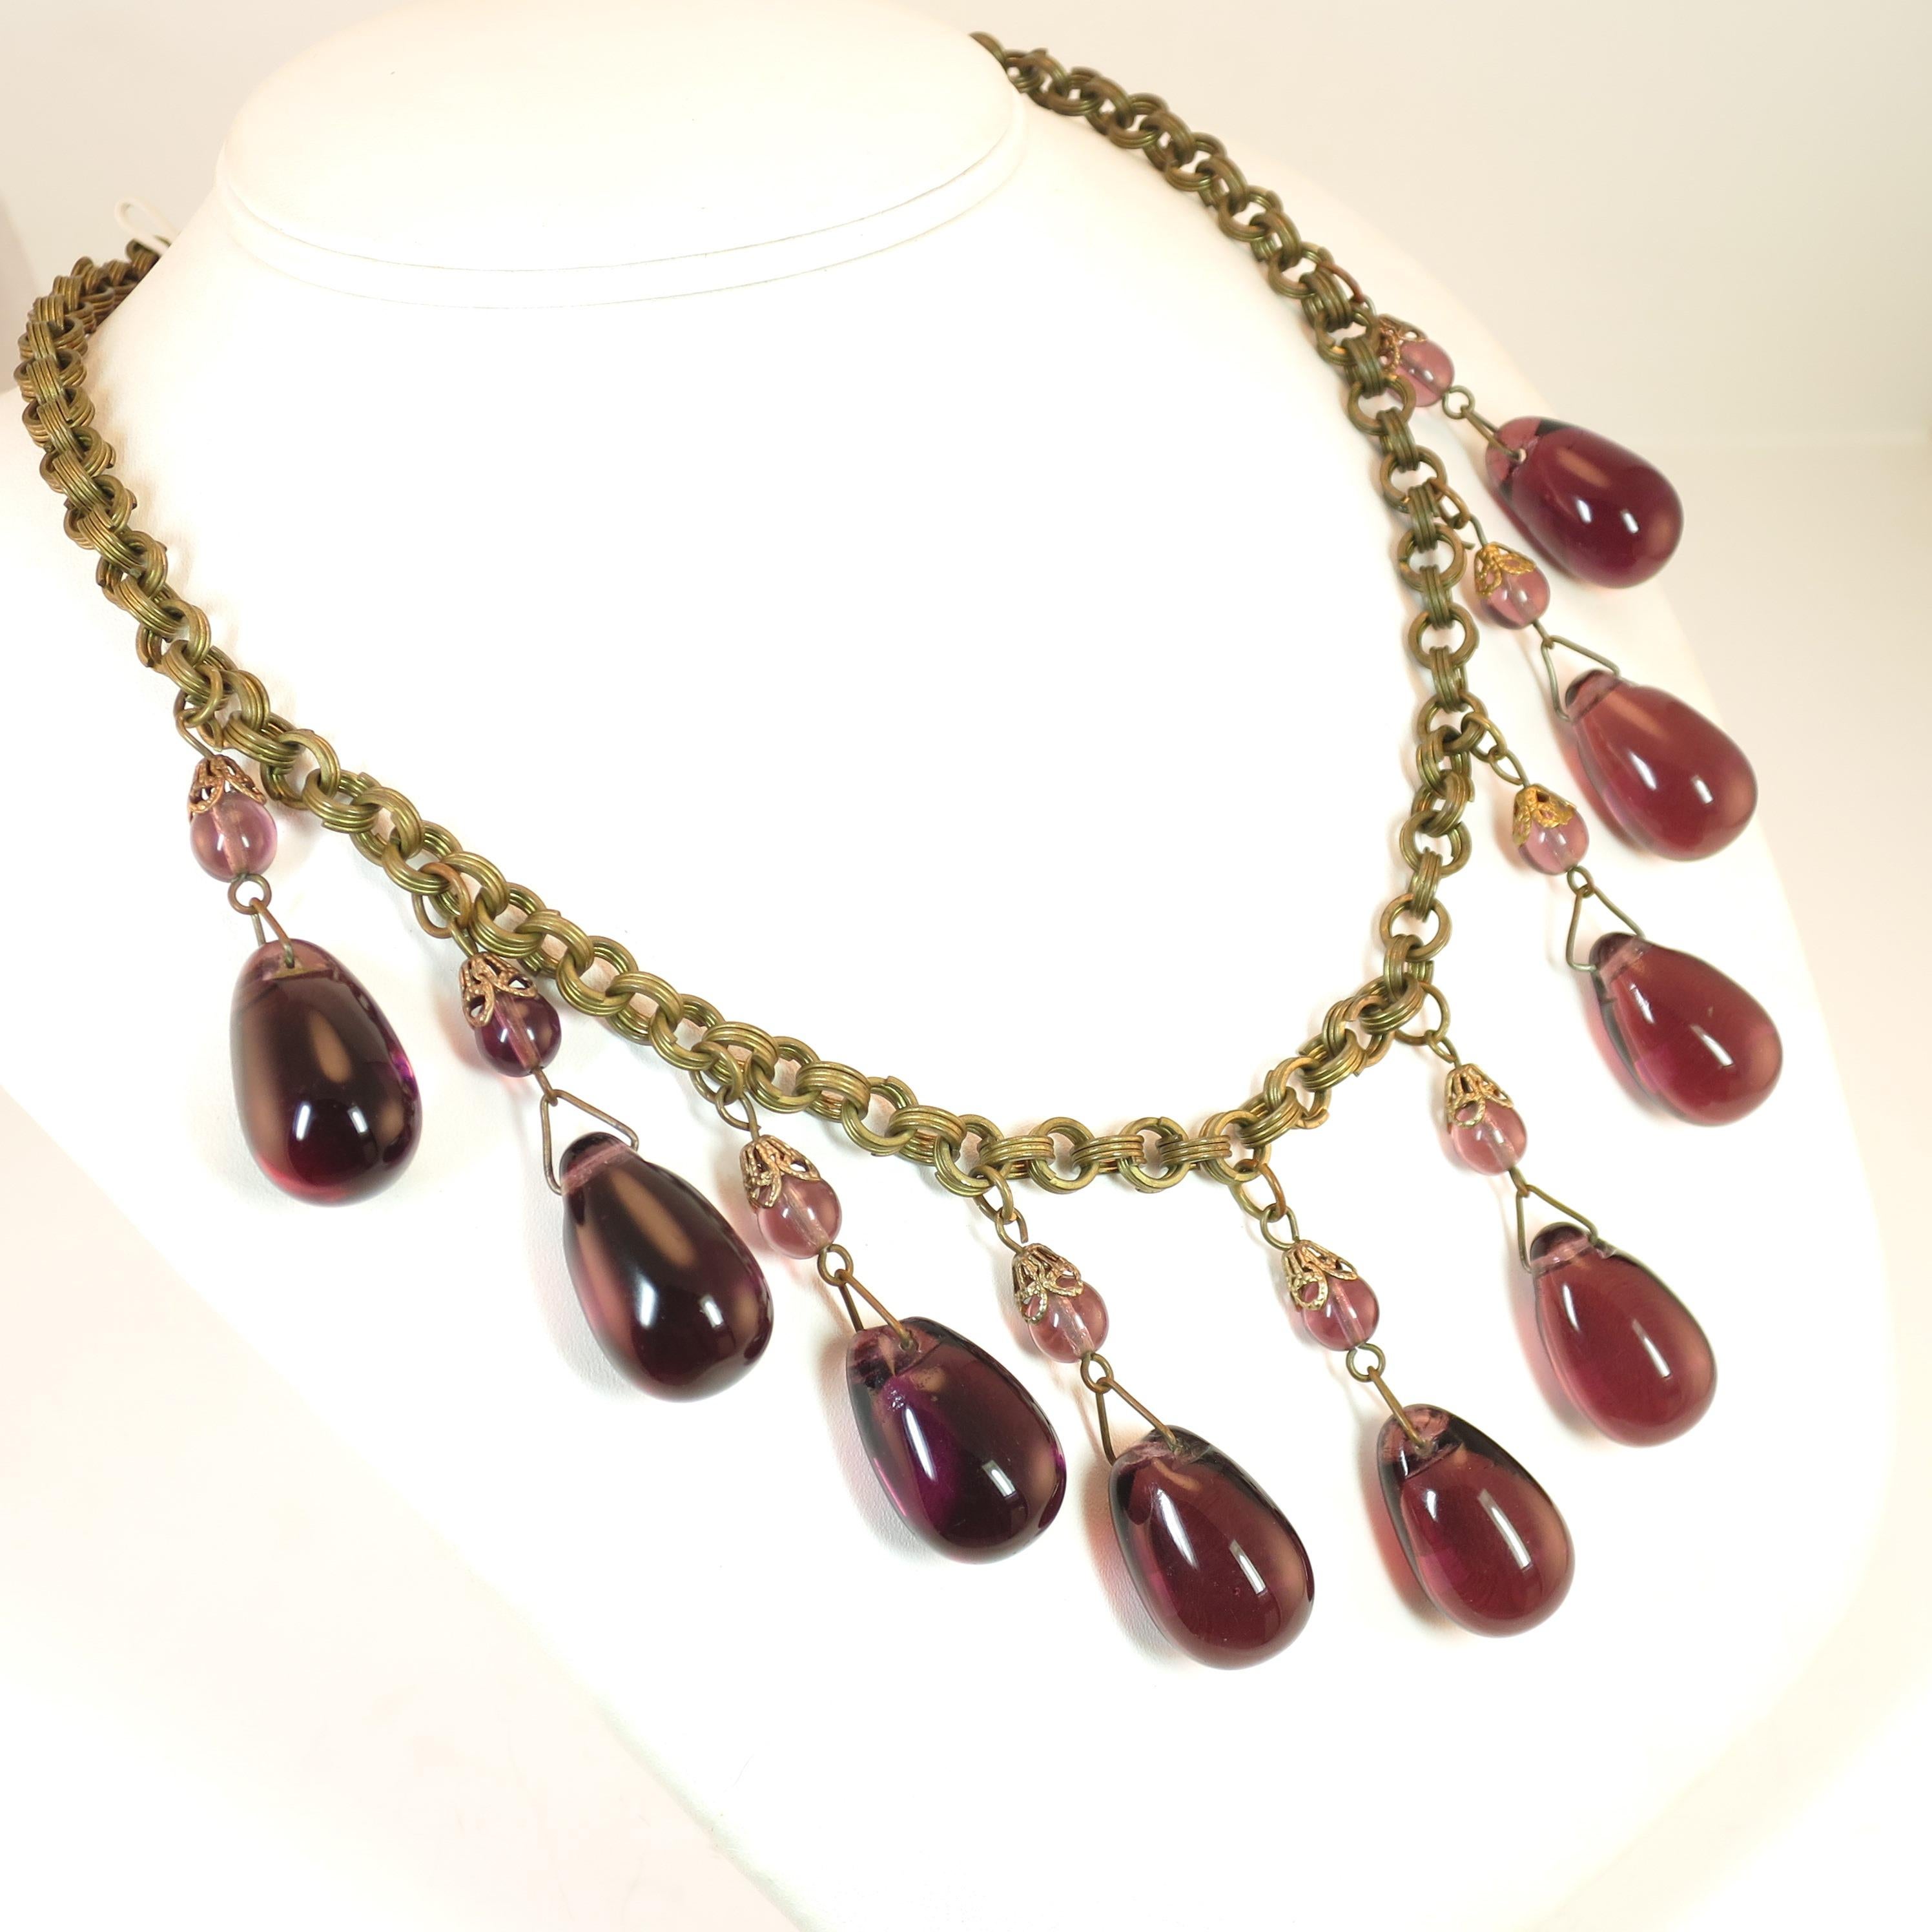 Offered here is a French Victorian heavy chain necklace with amethyst poured glass dangles from the 1870s. The gold-washed chain consists of round ribbed interlocking links, with a simple s-hook clasp. There are nine dangles, comprised of small